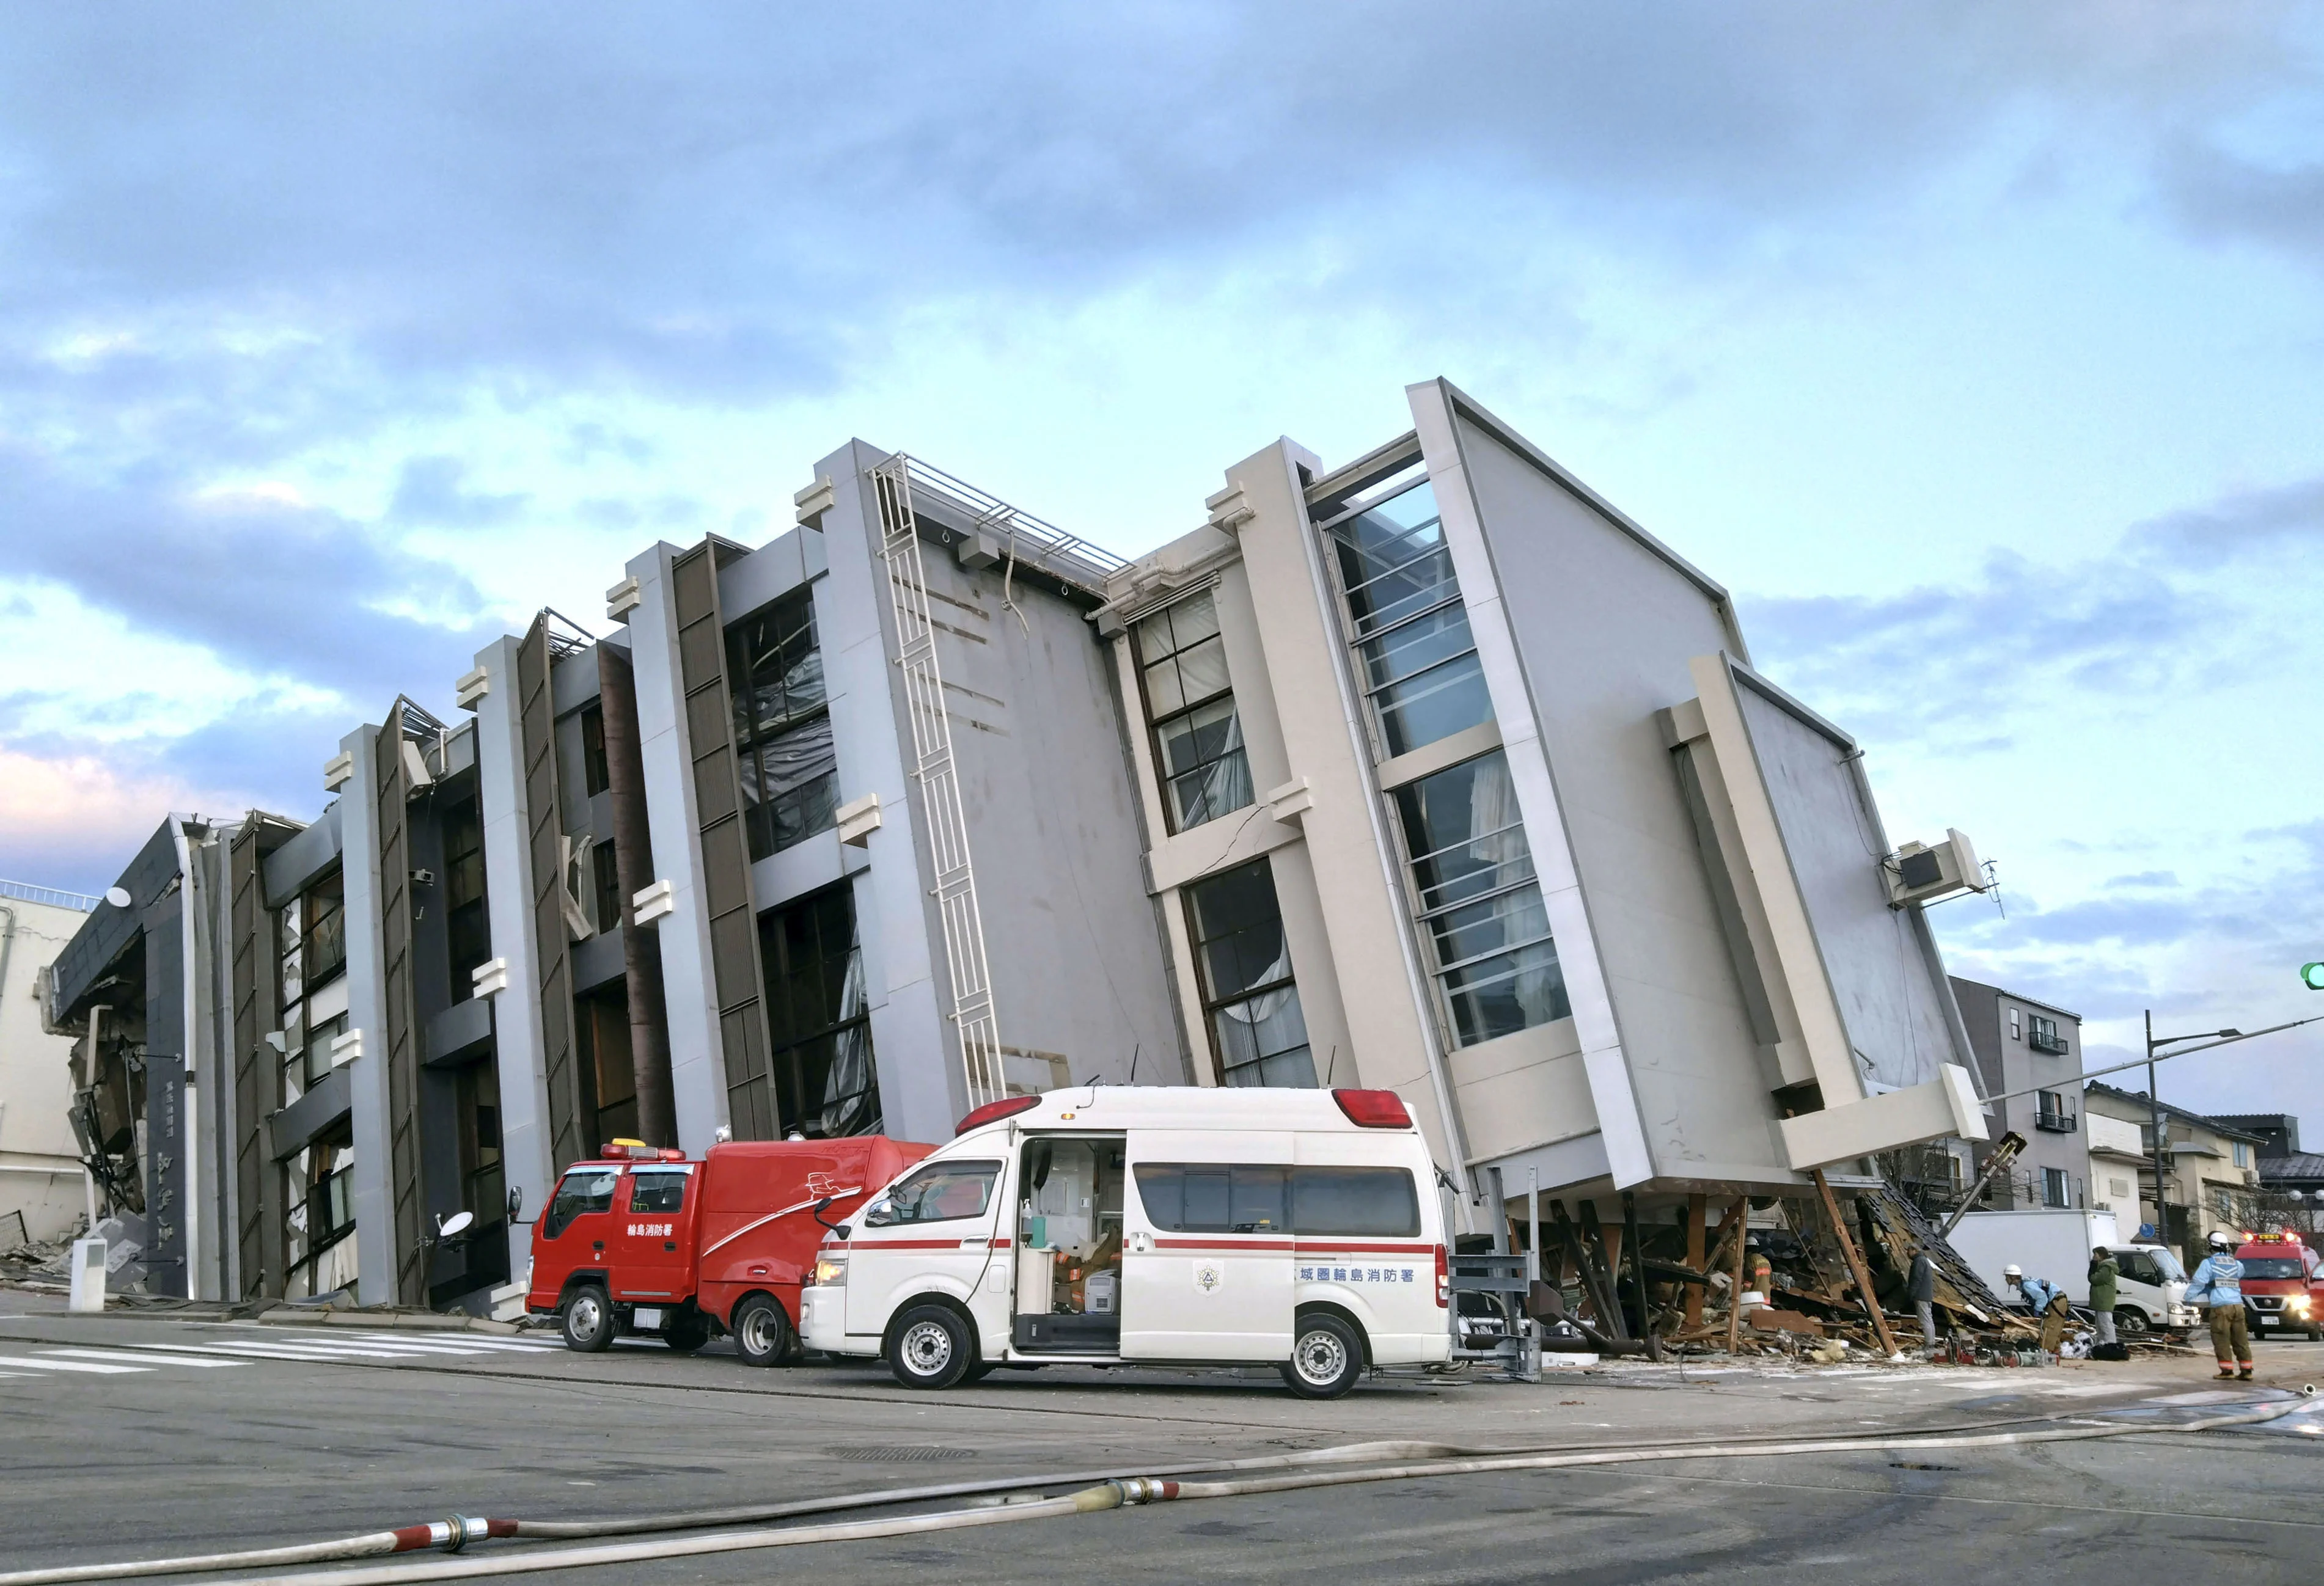 REUTERS: A collapsed building caused by an earthquake is seen in Wajima, Ishikawa prefecture, Japan January 2, 2024, in this photo released by Kyodo. Mandatory credit Kyodo via REUTERS